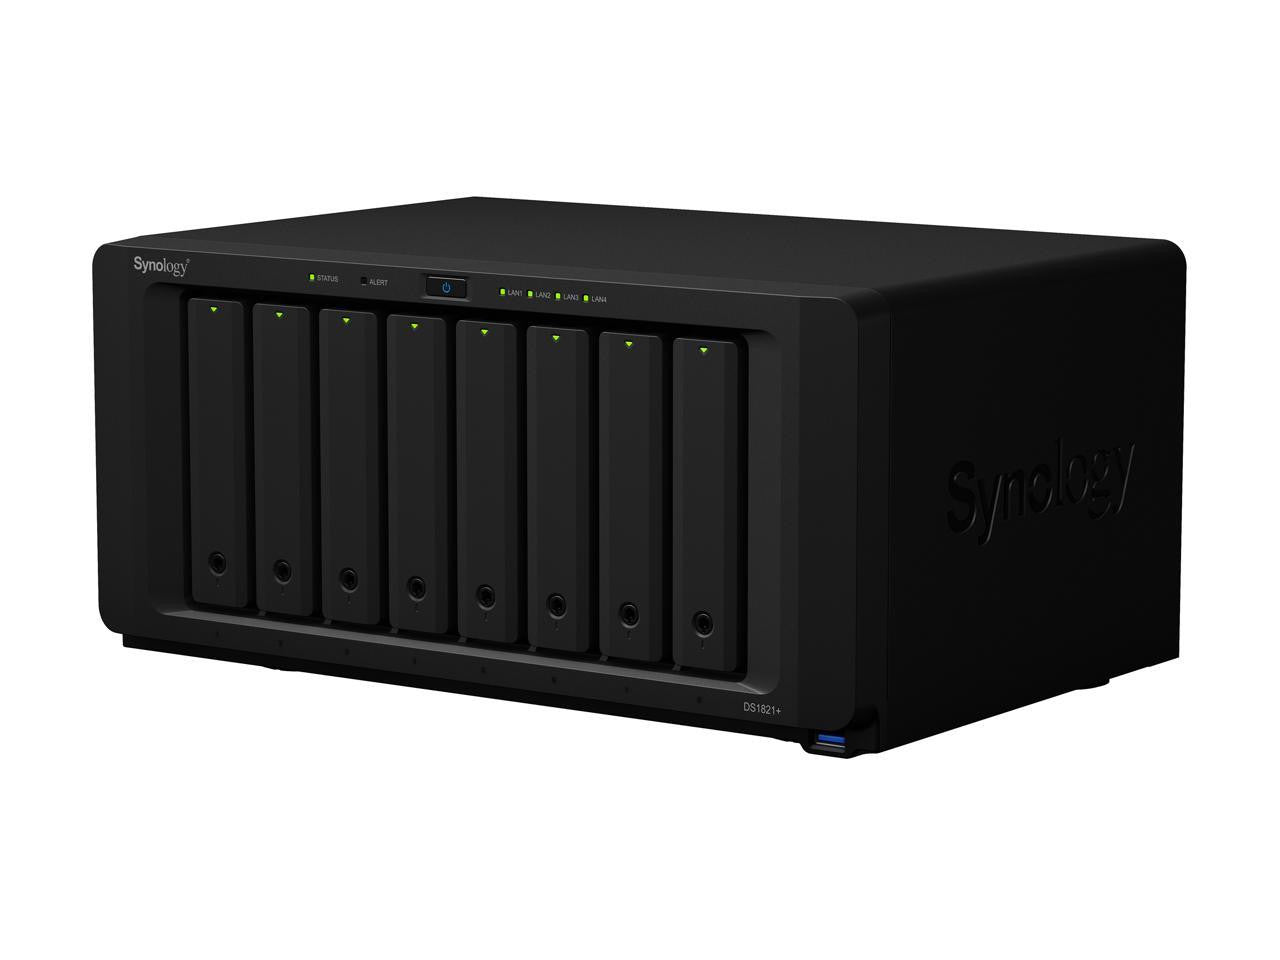 Synology DS1821+ 8-BAY DiskStation with 32GB RAM, 1.6TB (2x800GB) Cache, E10G21-F2 SFP+ 10Gb Adapter and 96TB (8 x 12TB) of Synology Enterprise HAT5300 Drives Fully Assembled and Tested